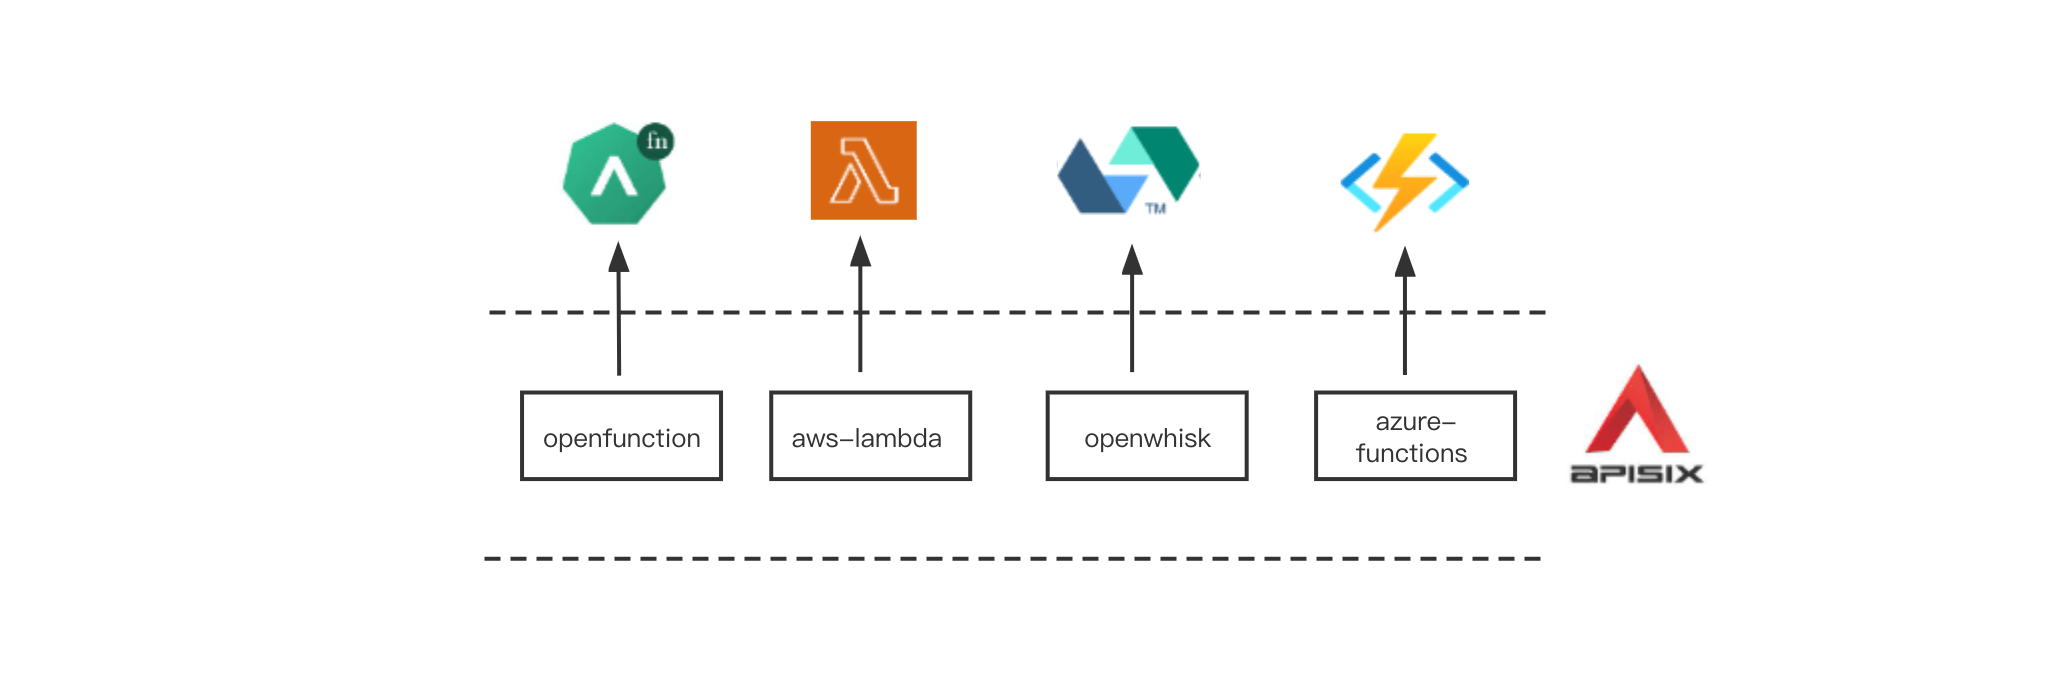 The relationship between Apache APISIX and Serverless-related products